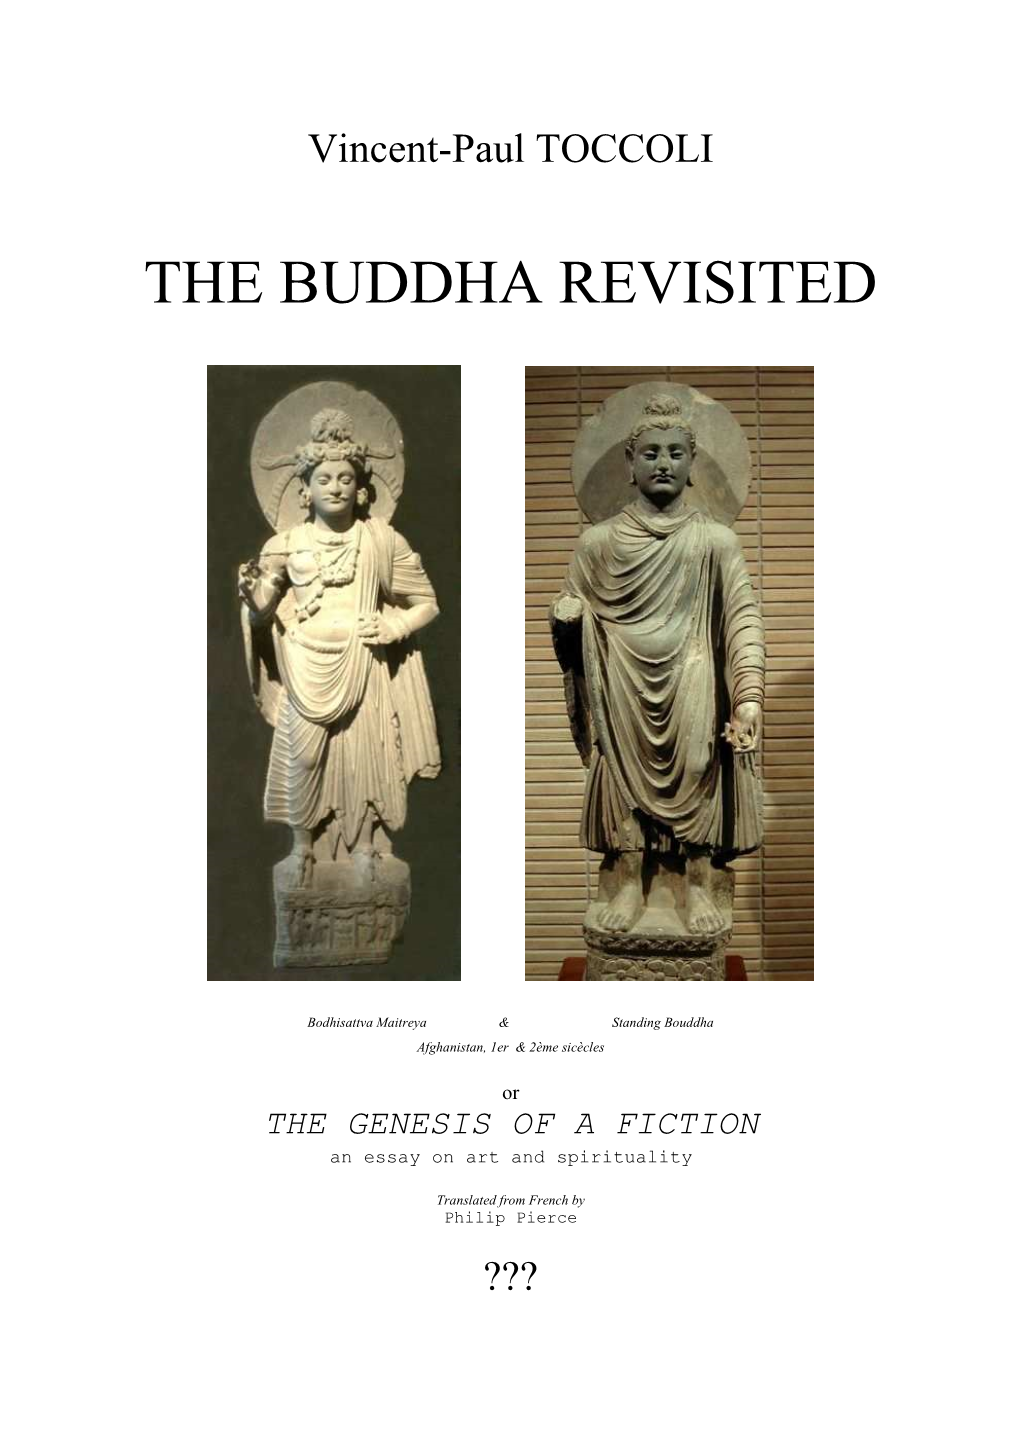 The Buddha Revisited